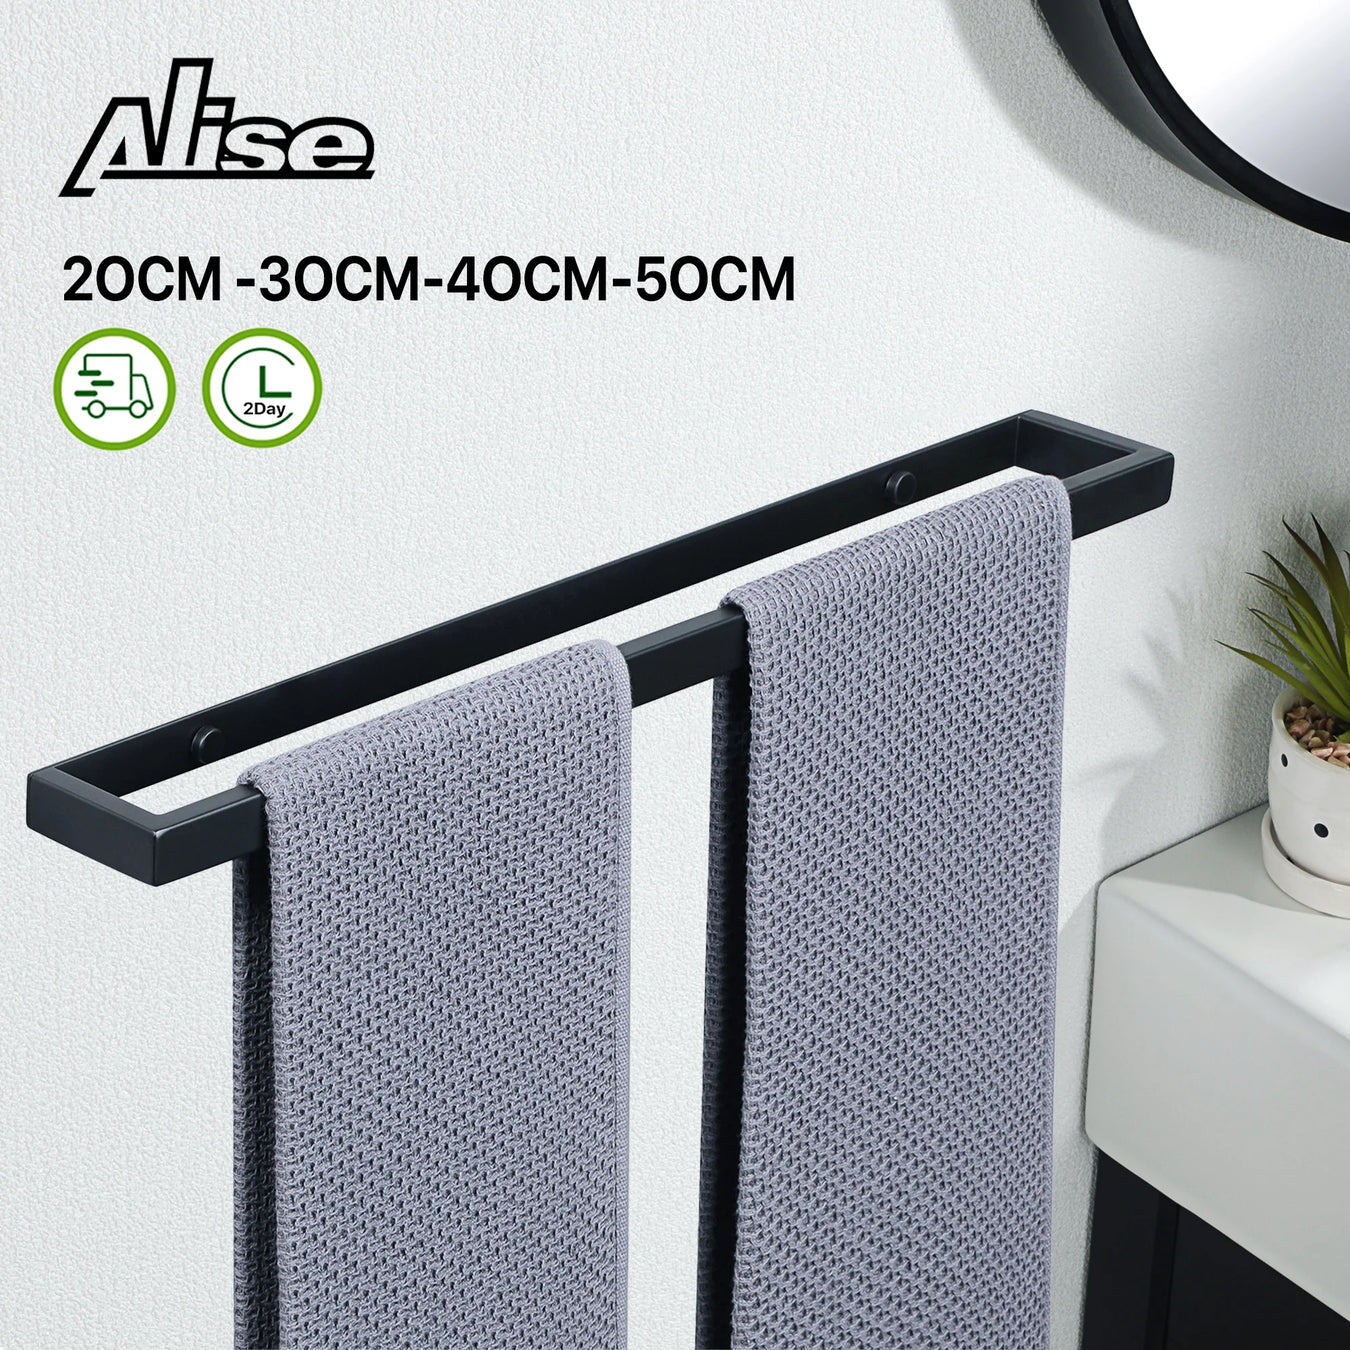 Adjustable Matte Black Stainless Steel Towel Holder with Wall Mount Options